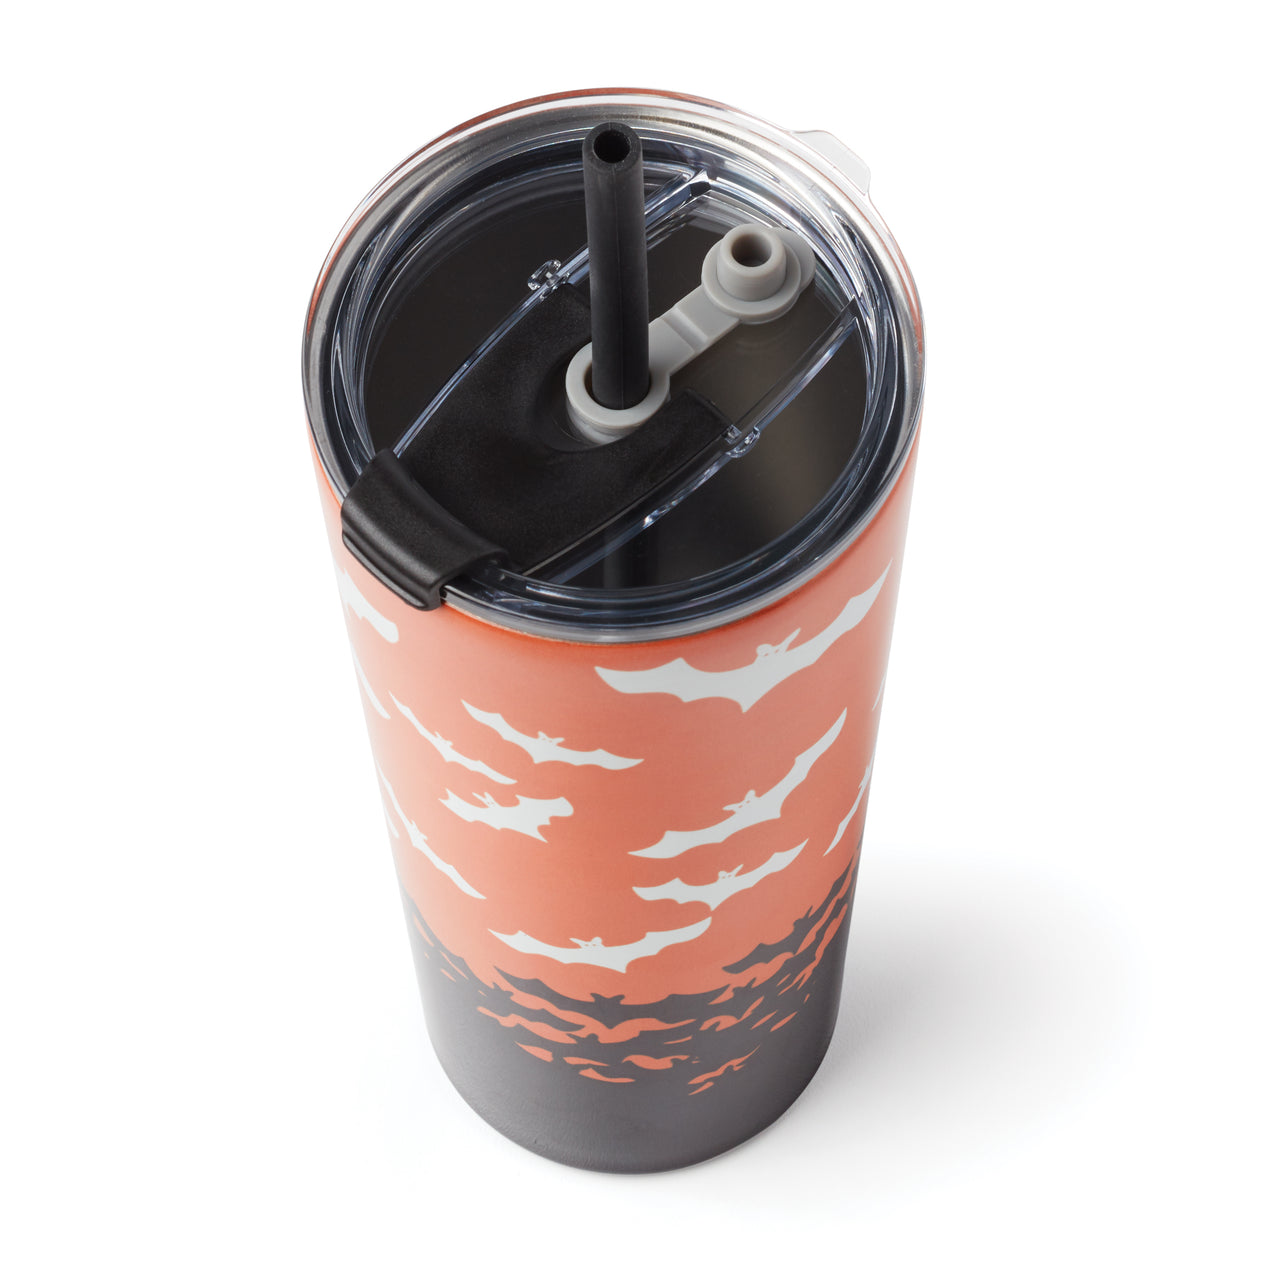 MorningSave: 2-Pack: Cambridge 24 oz Insulated Tumblers with Straw